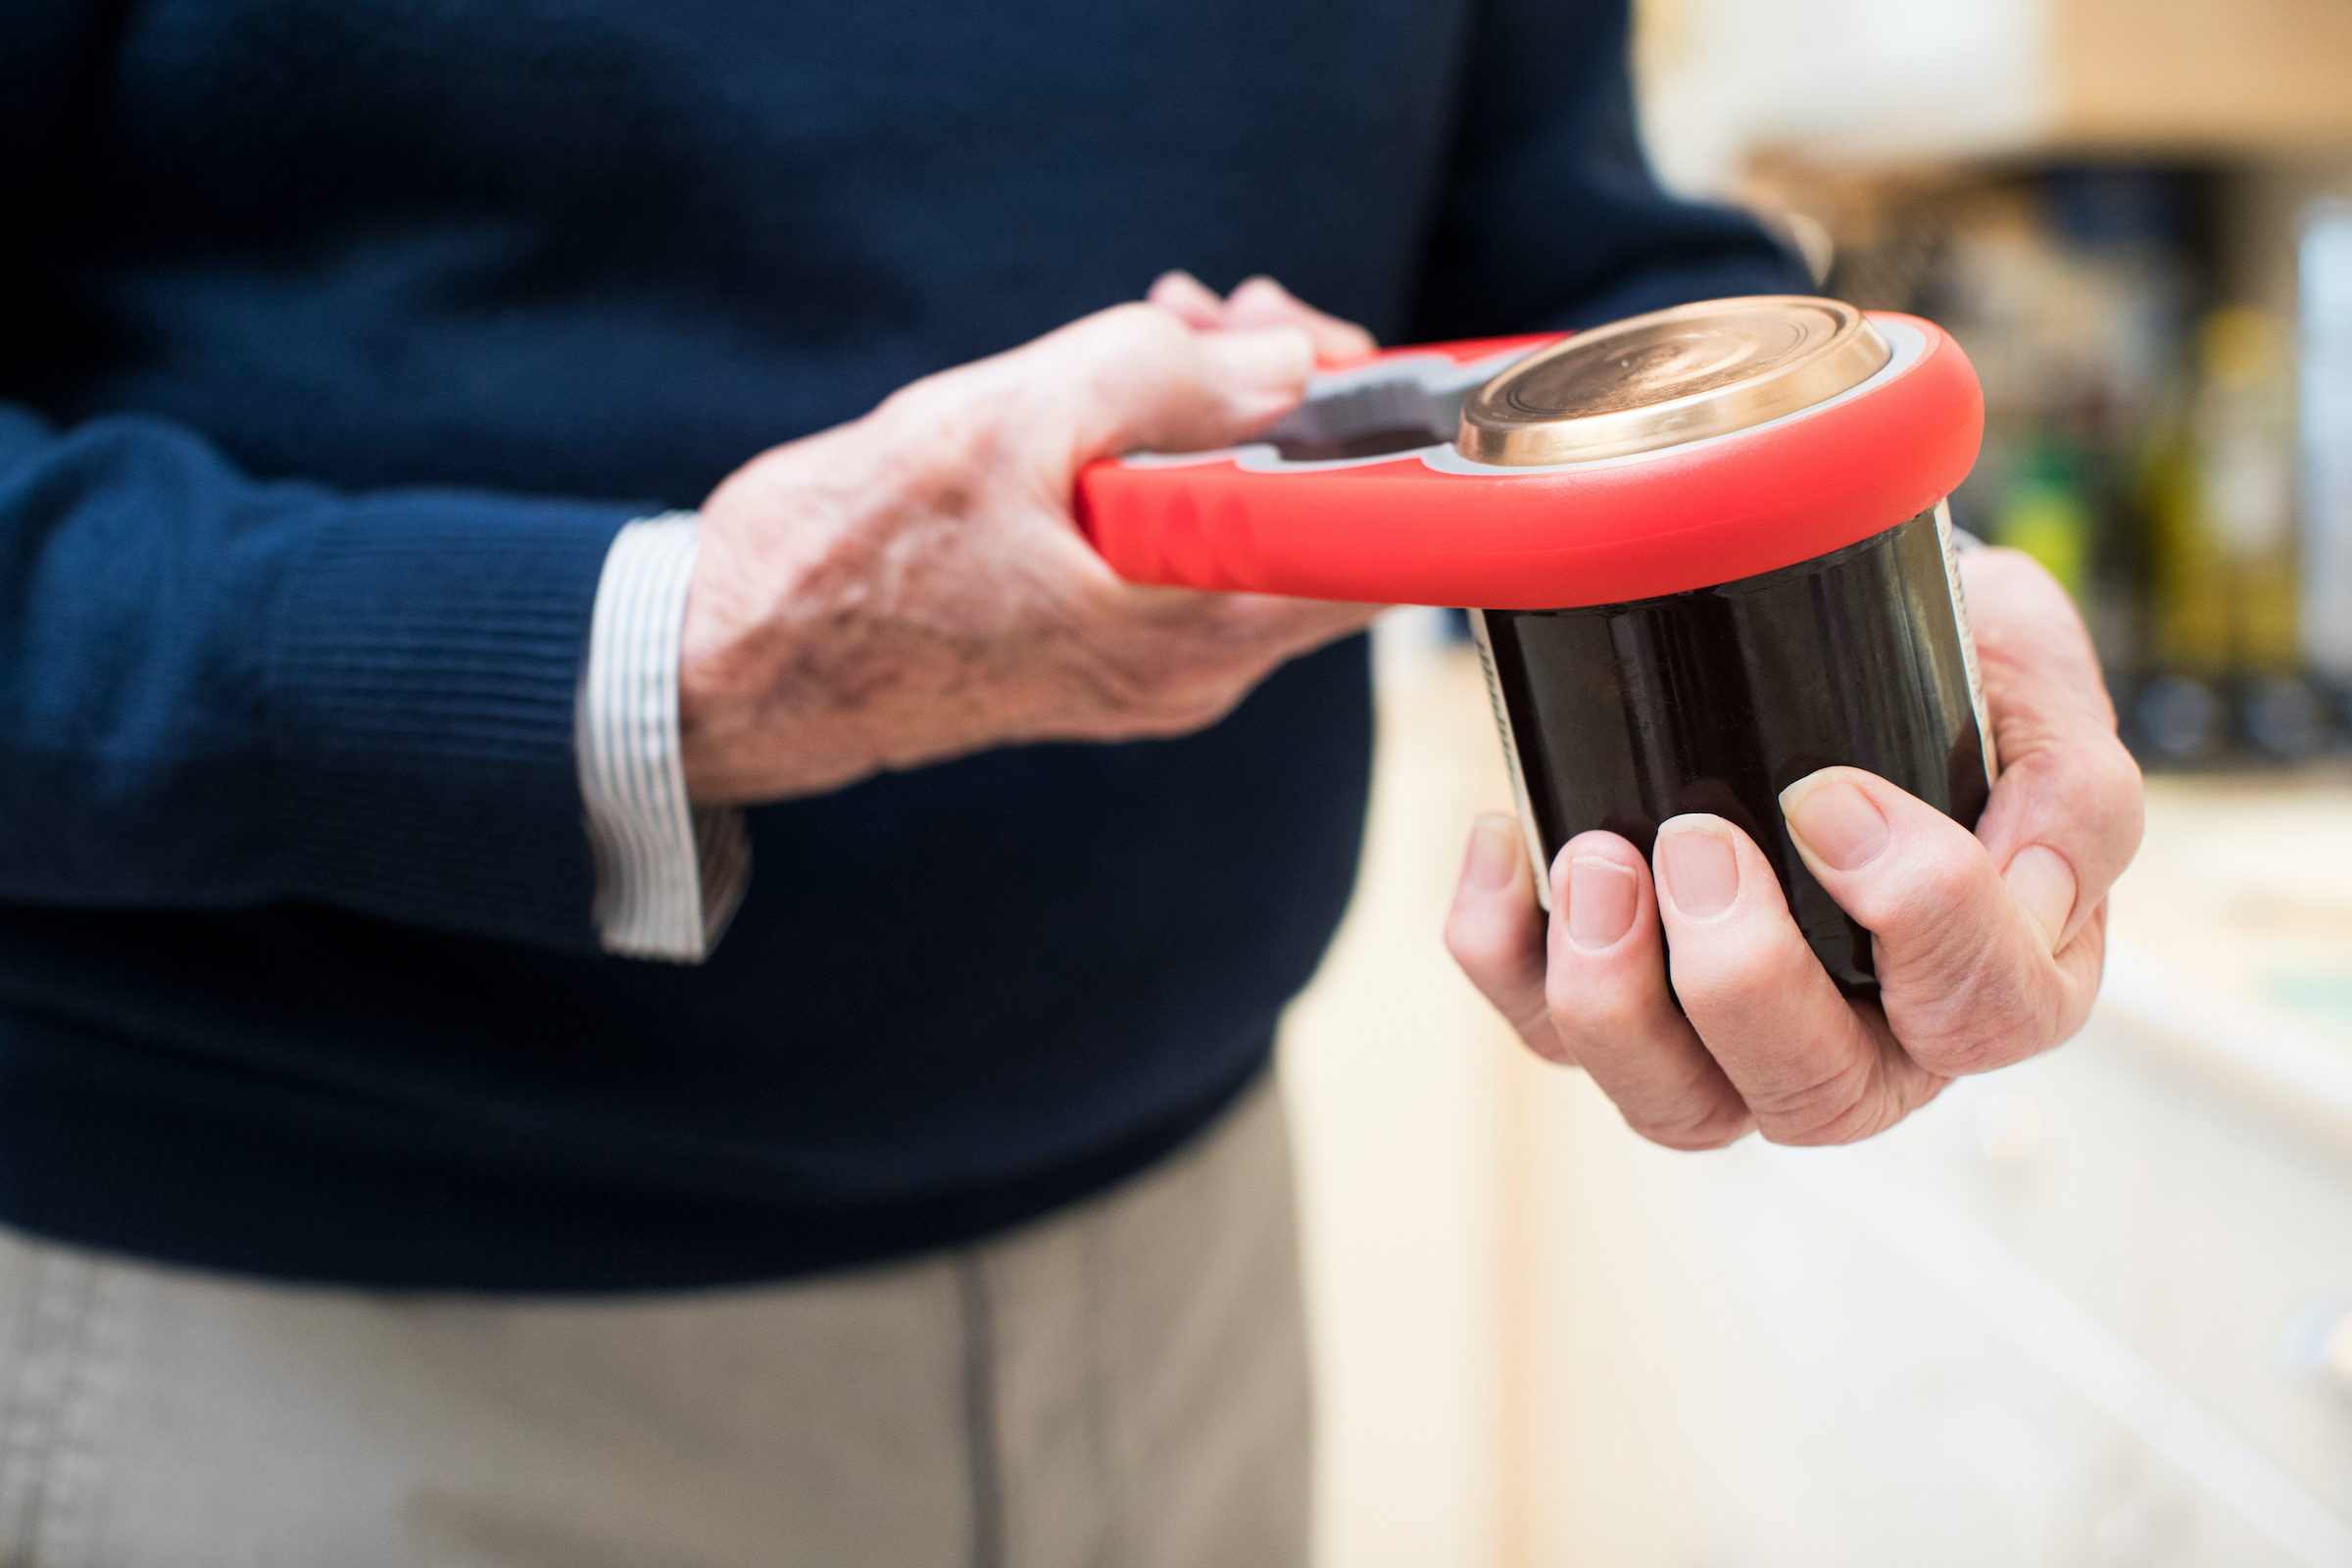 The 5 best gifts to buy for Parkinson's patients / people with Parkins